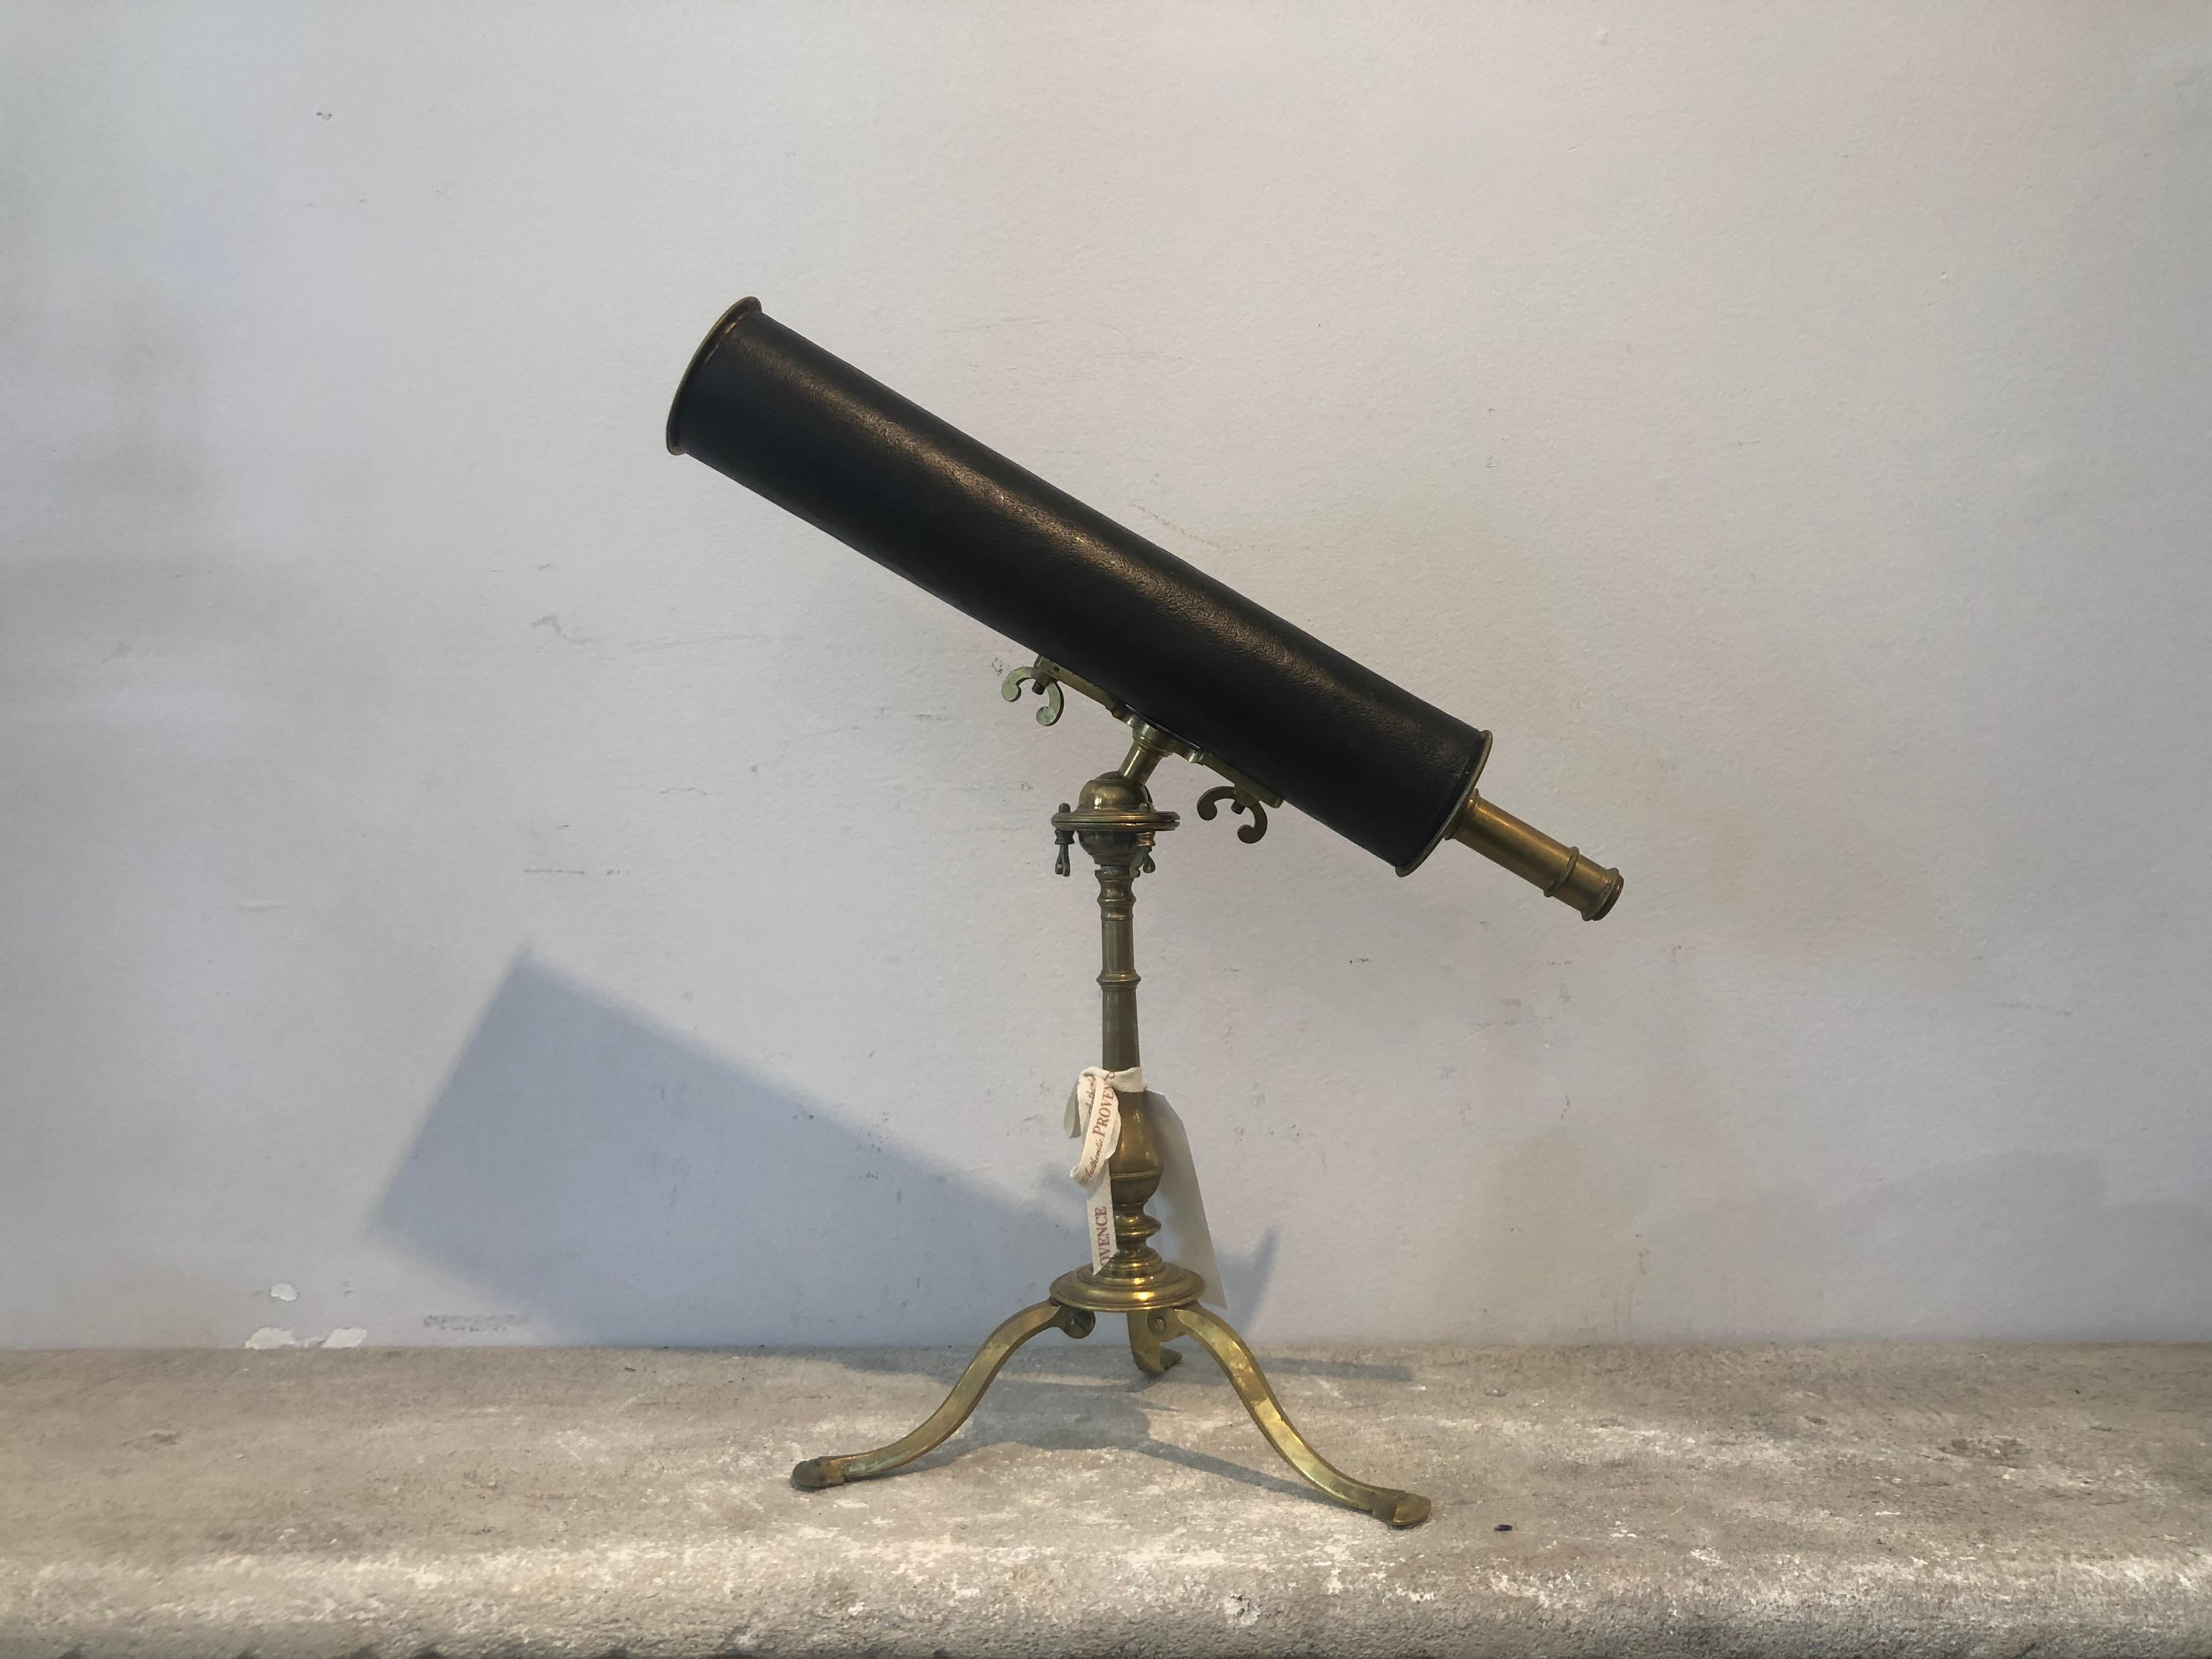 A very rare collection of nine vintage reflecting telescopes from the early and late 18th Century. The collection is comprised of three draw refracting telescopes, antique vintage brass telescopes, a single English draw brass telescope, large